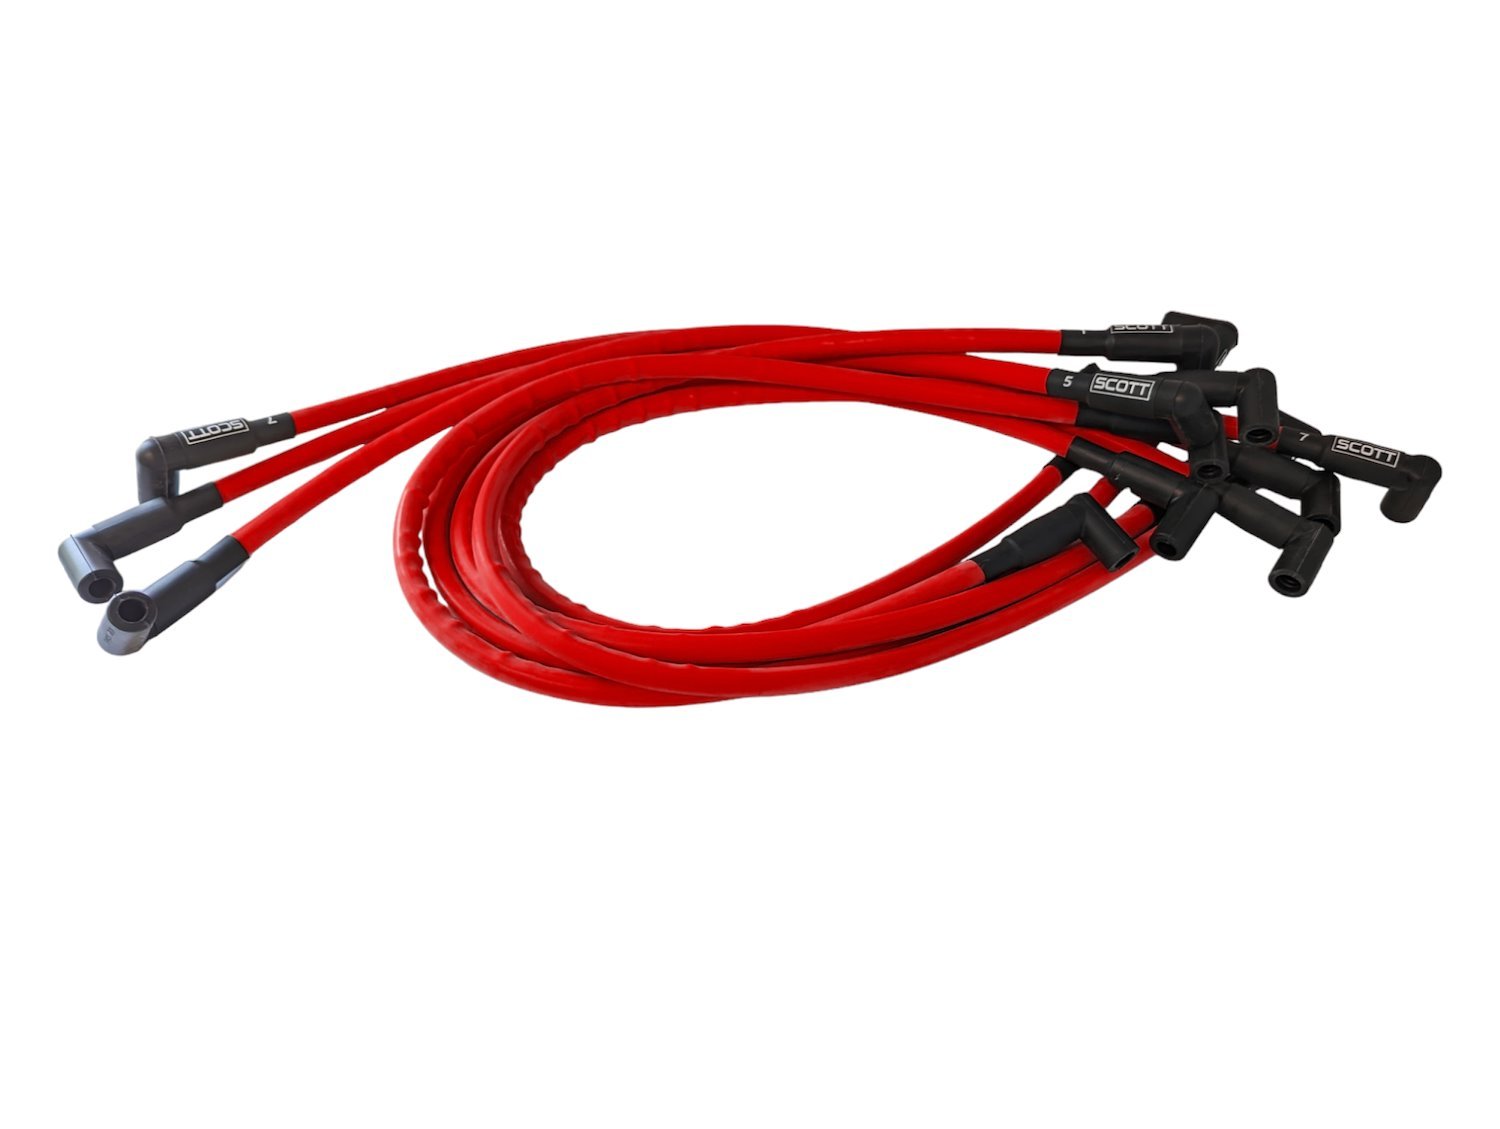 SPW-CH-407-2 High-Performance Silicone-Sleeved Spark Plug Wire Set for Small Block Chevy, Under Header [Red]